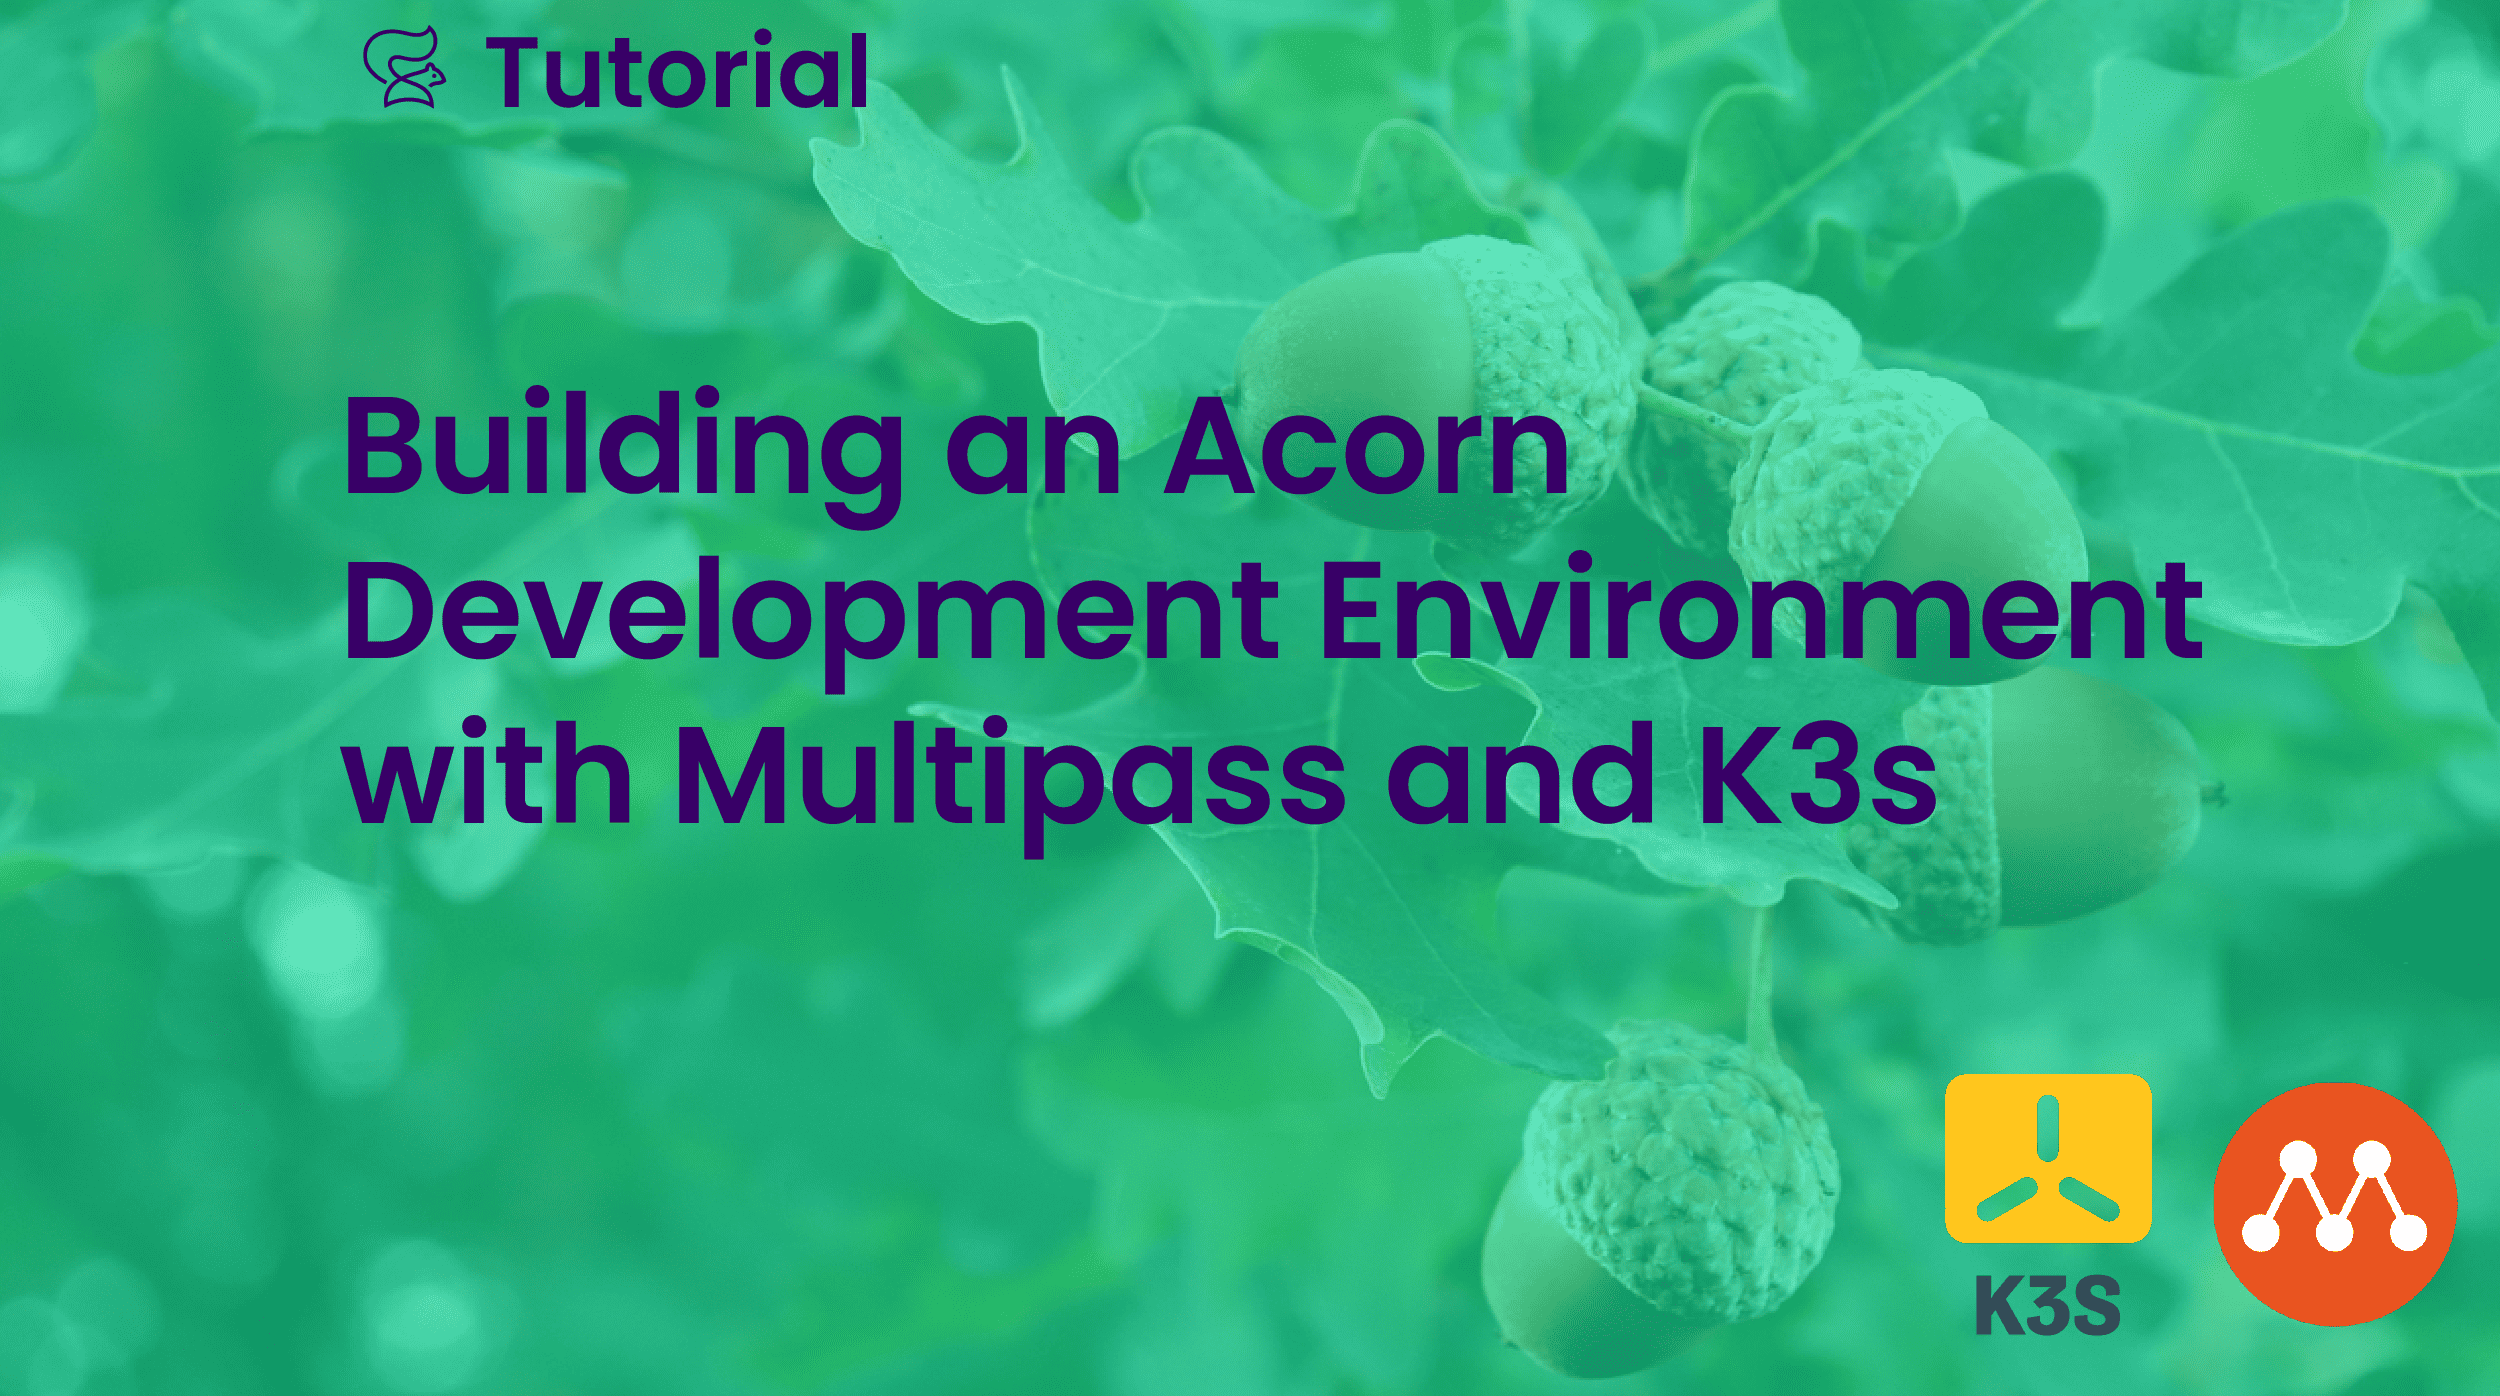 Building an Acorn Development Environment with Multipass and K3s